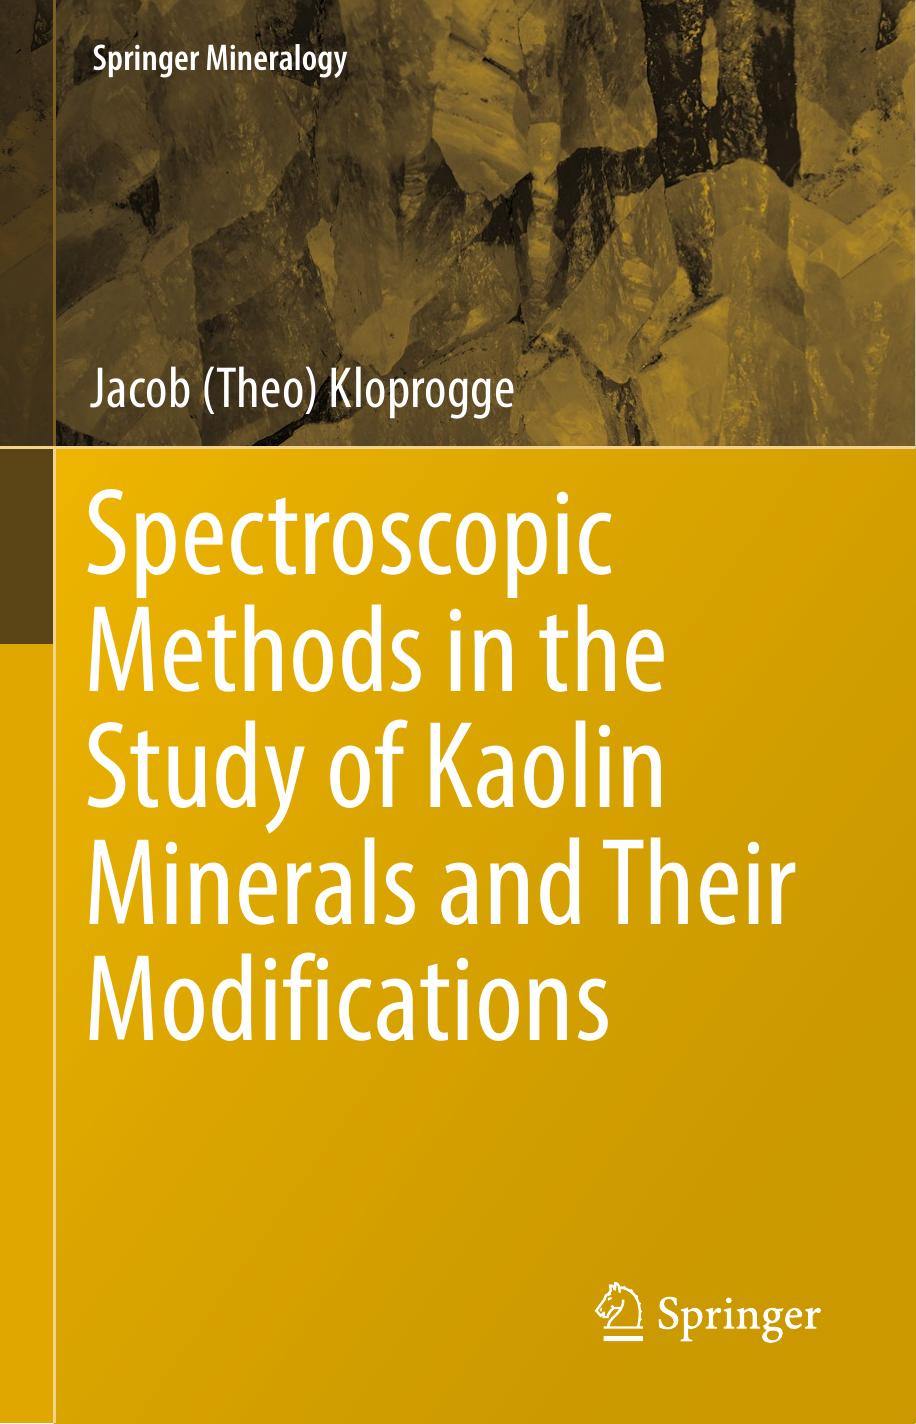 Spectroscopic Methods in the Study of Kaolin Minerals and Their Modifications by Jacob (Theo) Kloprogge